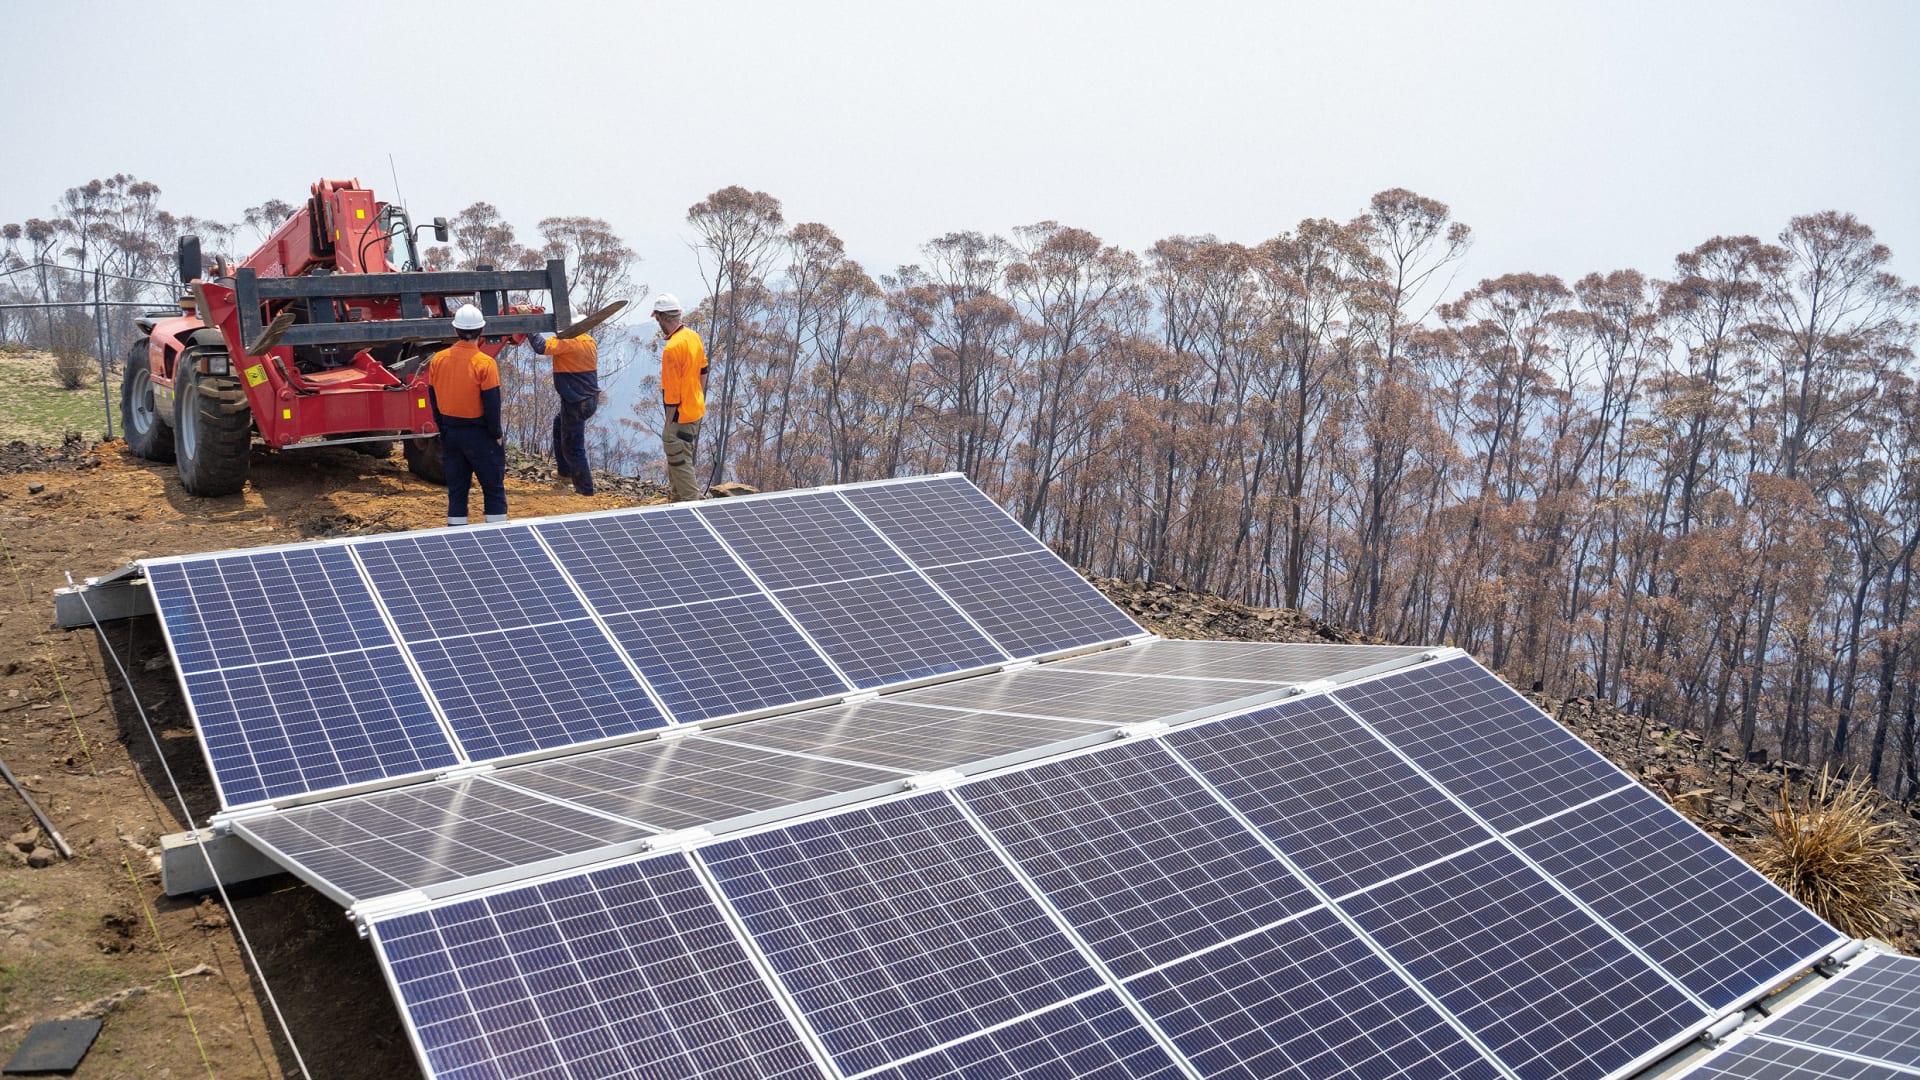 New microgrids are helping Australia get power back after the fires